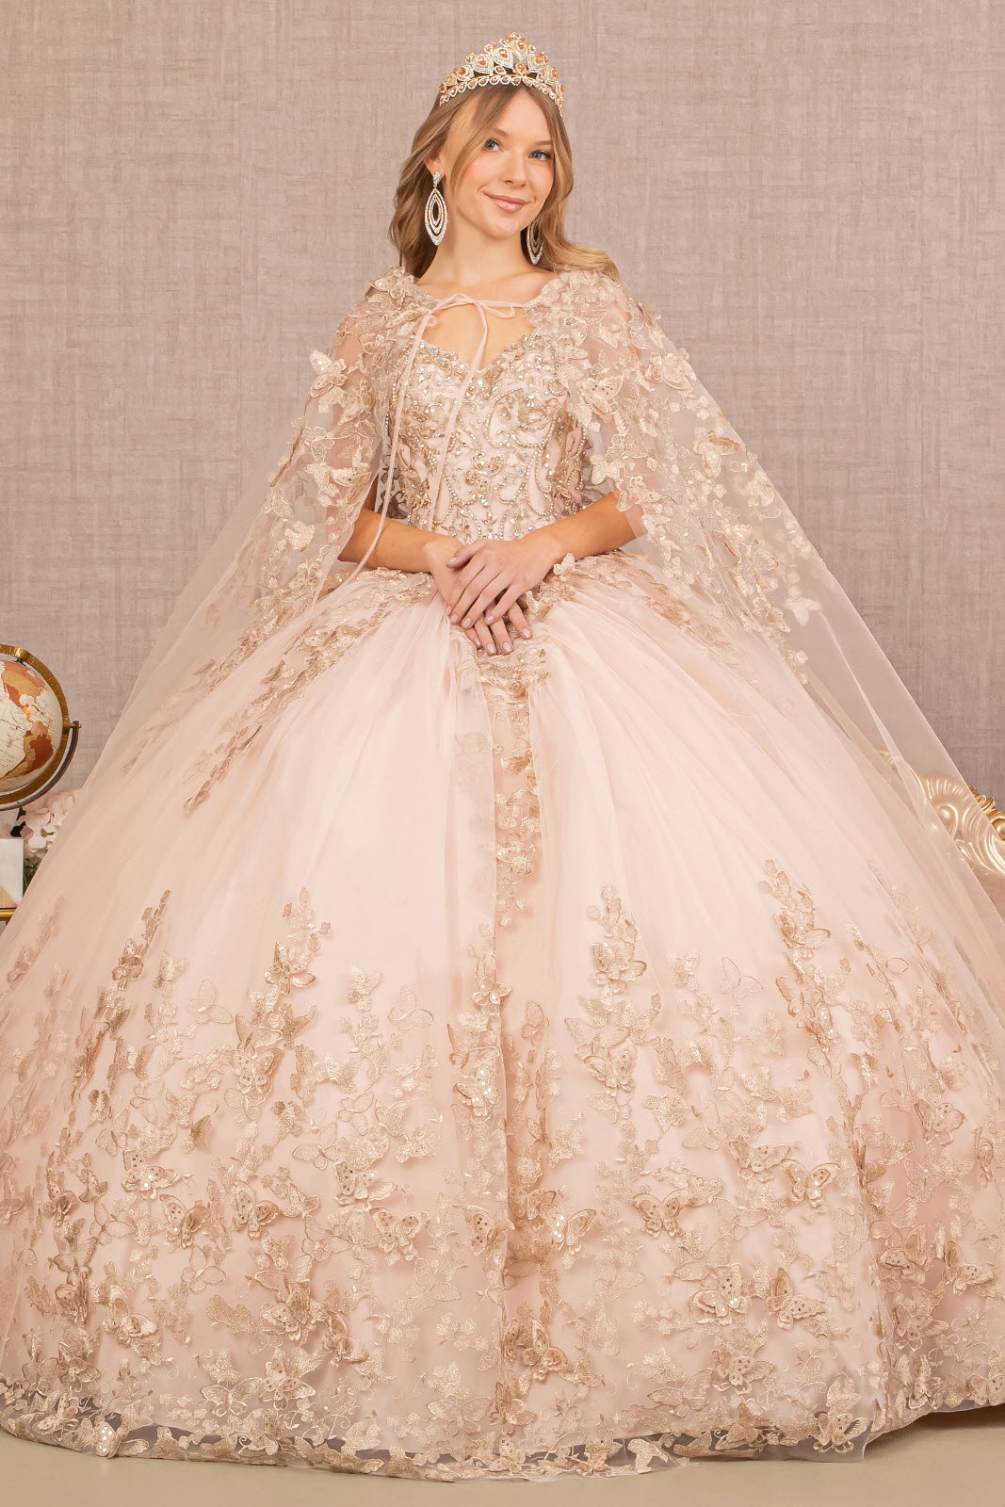 
Jewel Mesh Quinceanera Gown w/ 3-D Butterfly Appliques and Long Mesh Cape
Fabric: